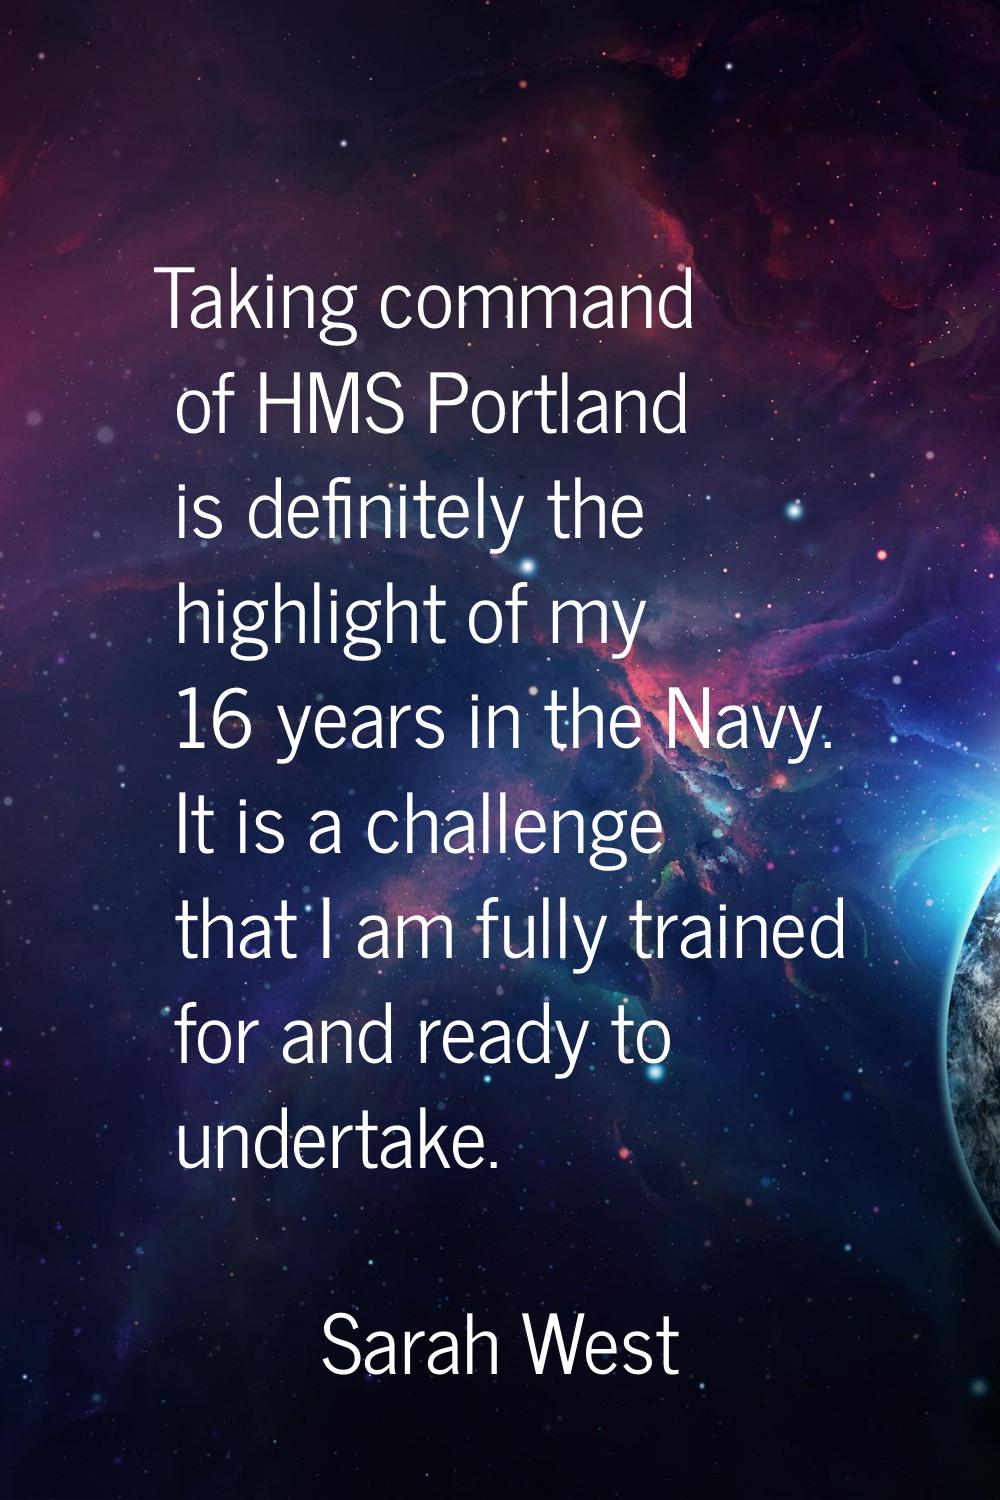 Taking command of HMS Portland is definitely the highlight of my 16 years in the Navy. It is a chal